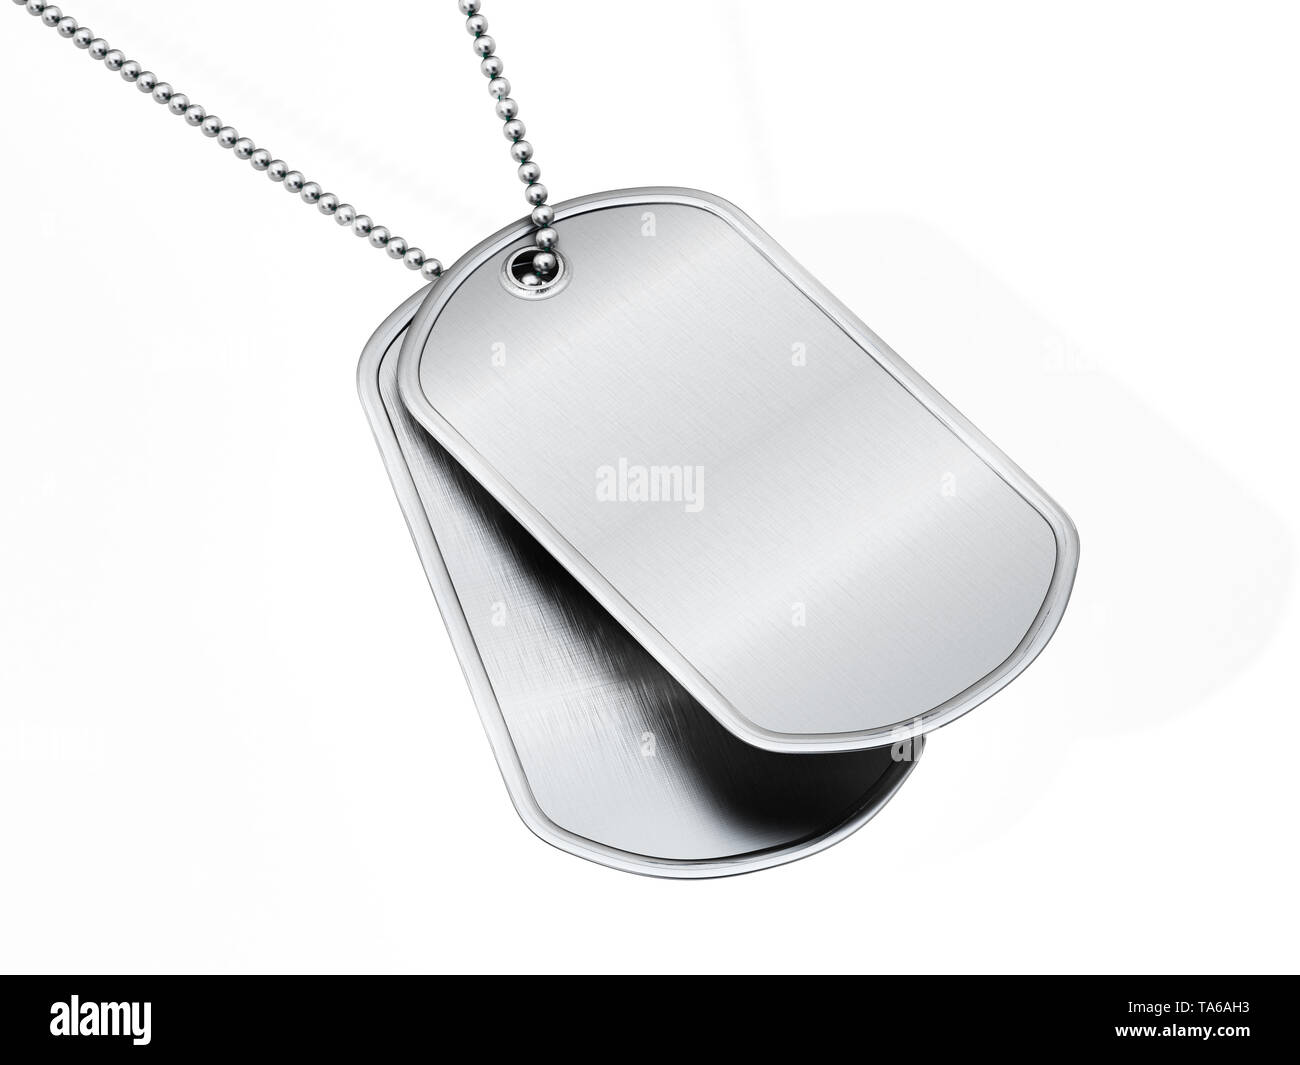 PAIR SET U.S. PERSONALISED STAINLESS STEEL ARMY MILITARY DOG TAGS  -THEDOGTAGCO